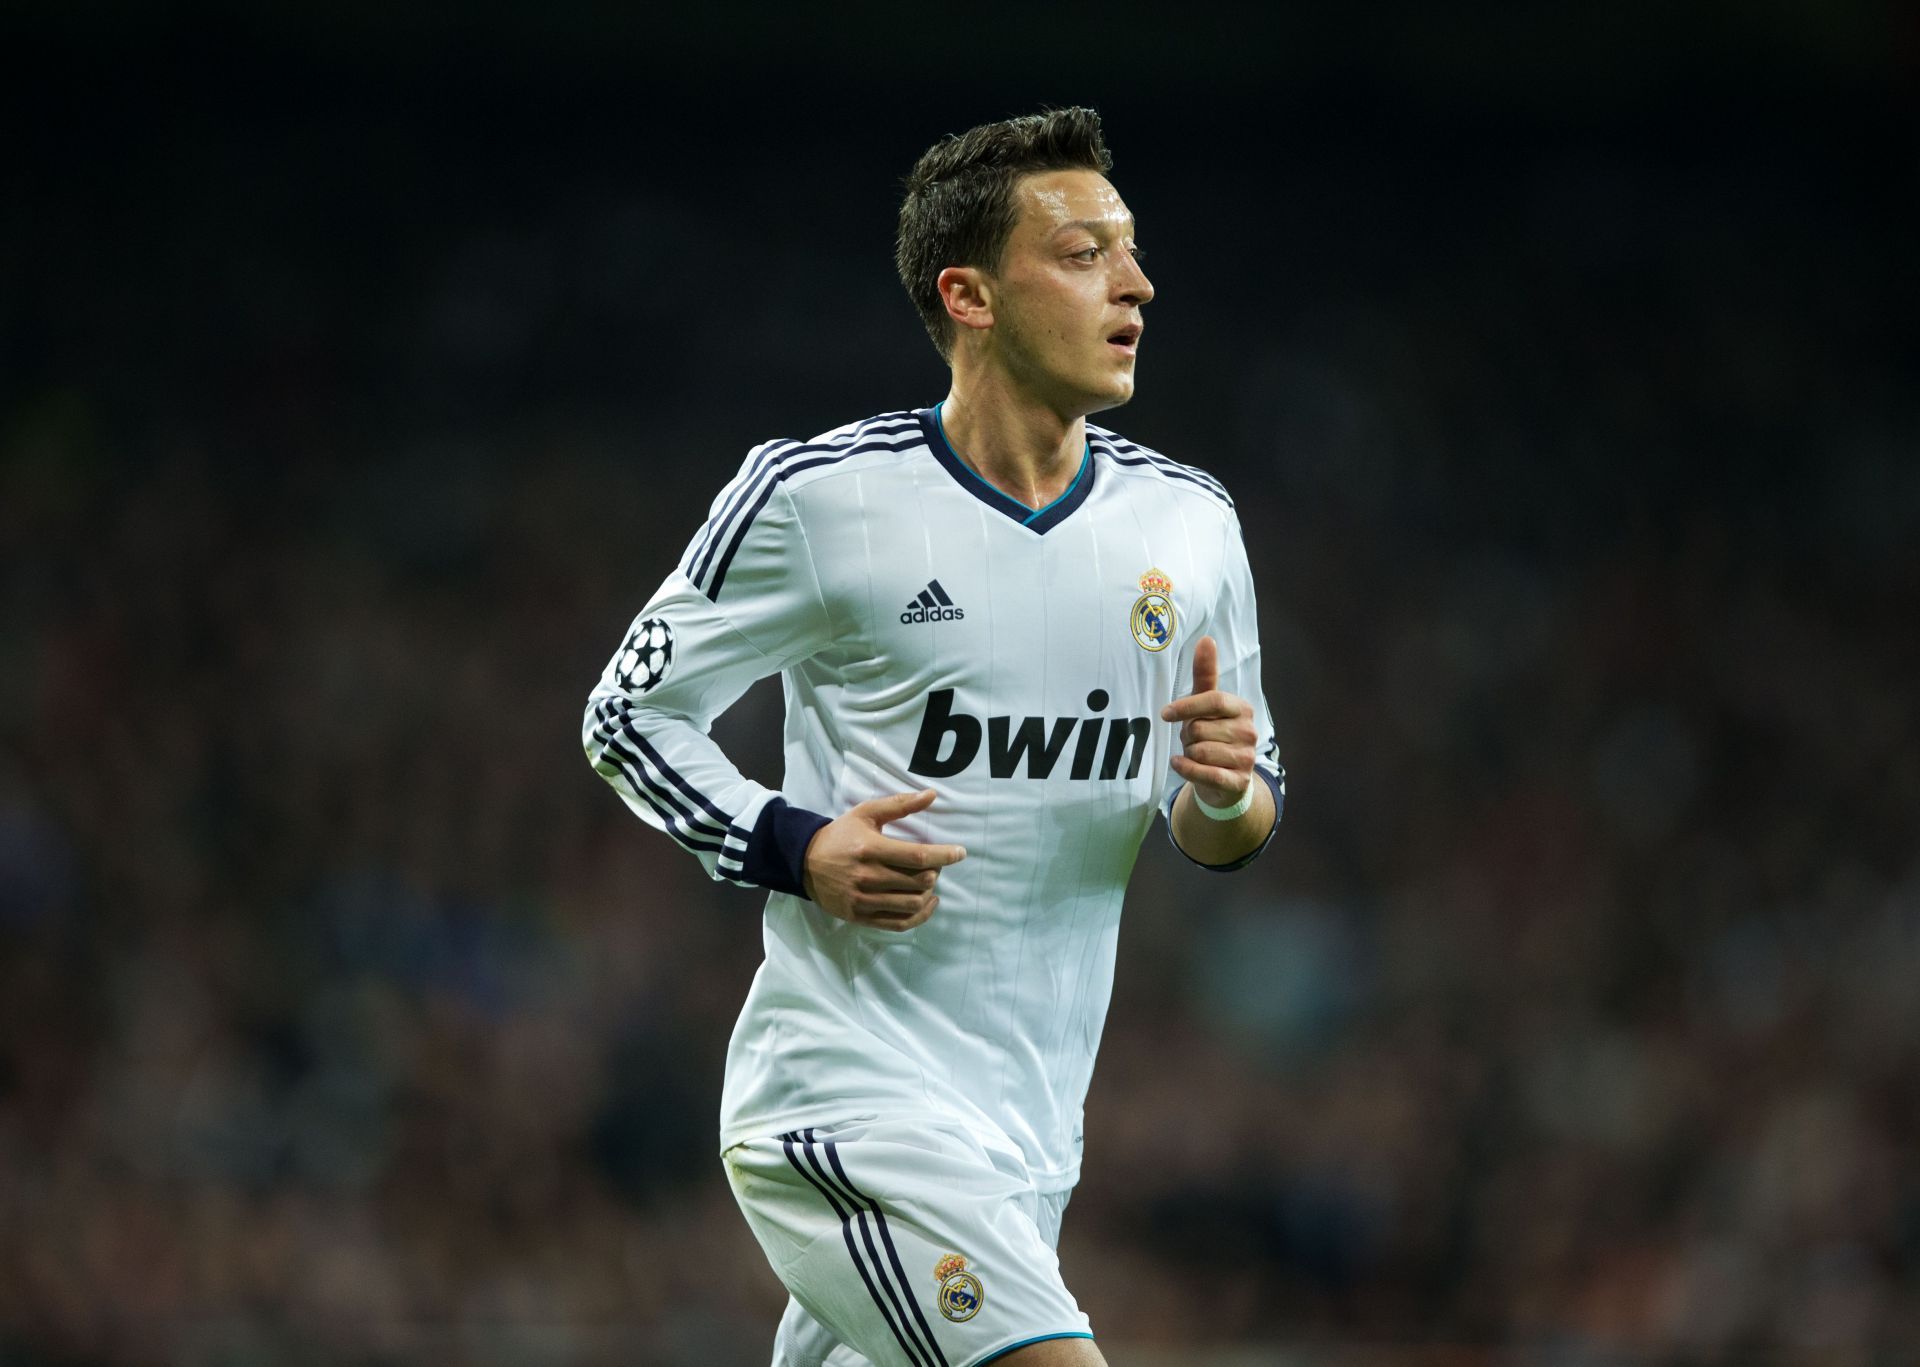 The midfielder ended up joining Barcelona&#039;s arch-rivals Real Madrid.